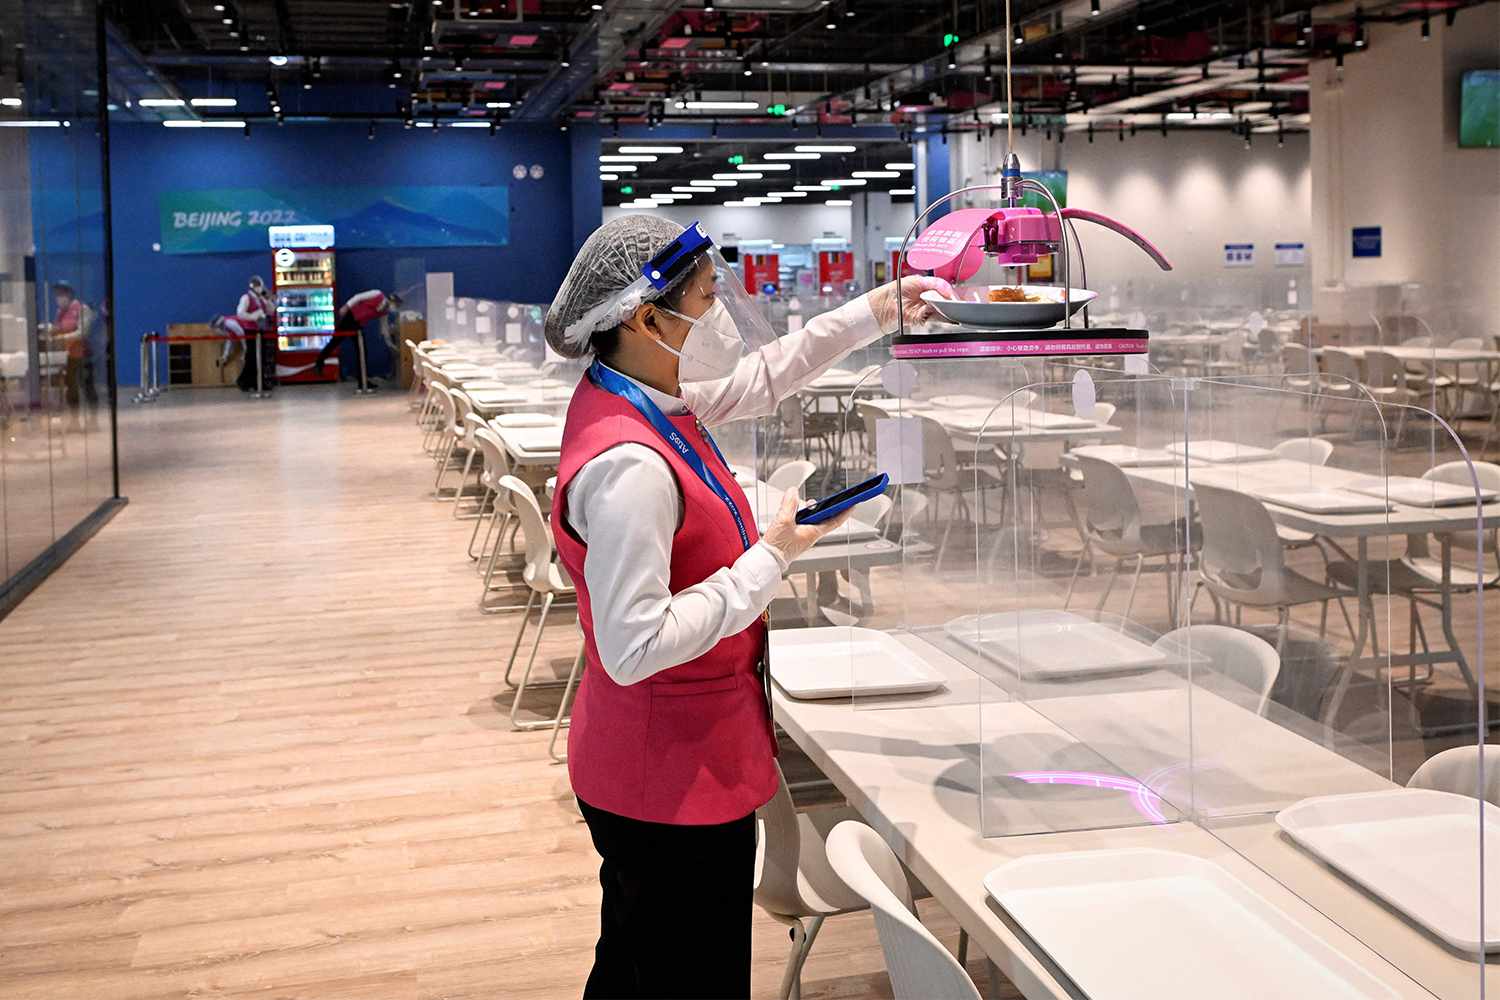 Beijing Olympics Will Have Robot Waiters Delivering Dishes from the Ceiling